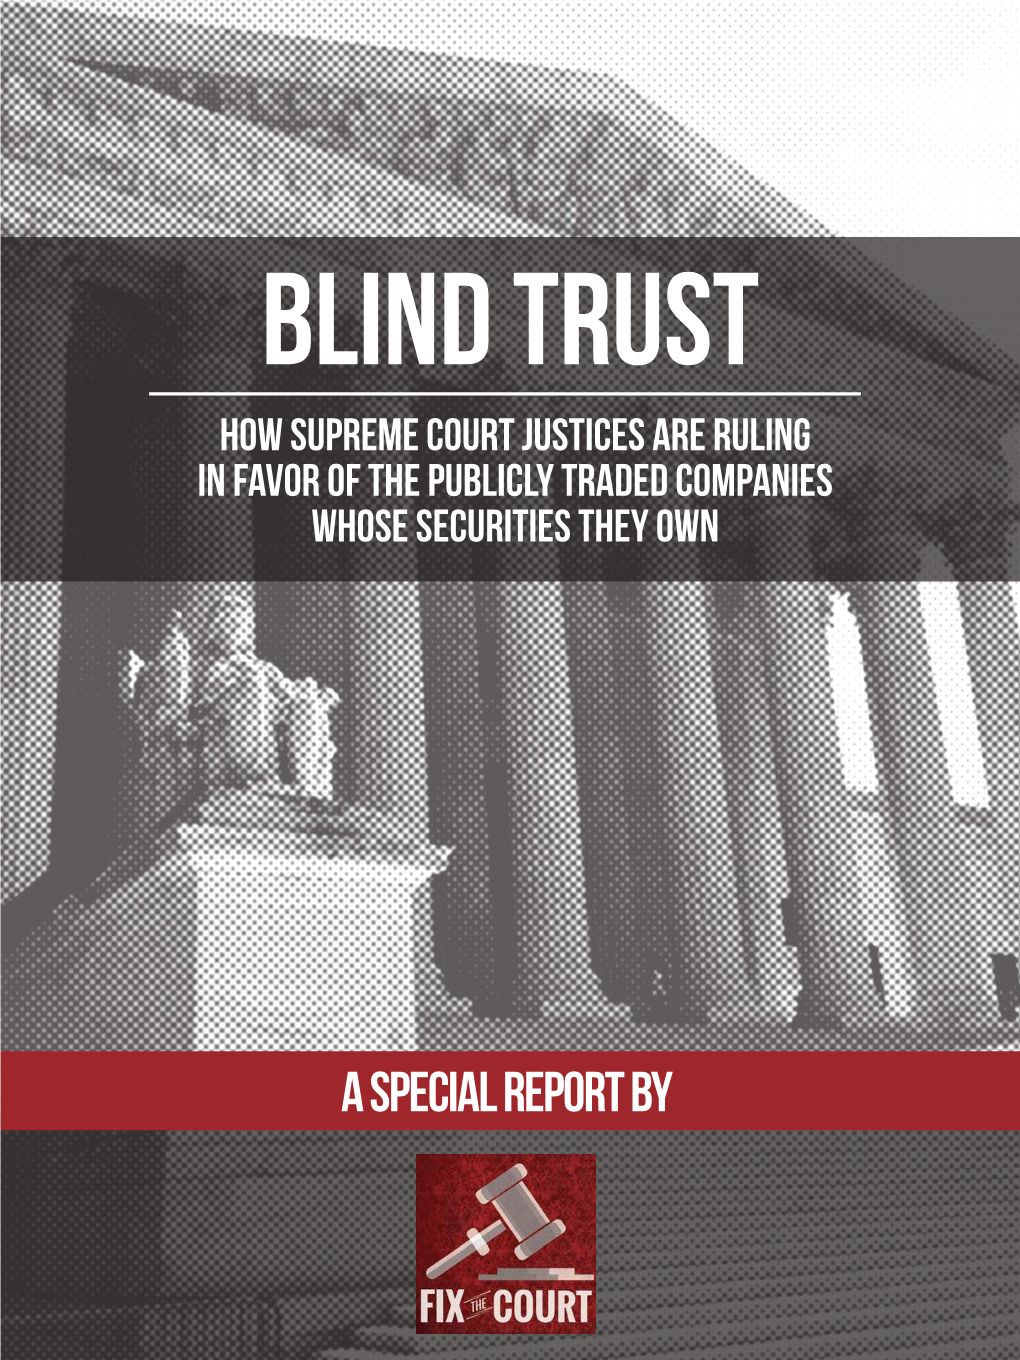 Blind Trust How Supreme Court Justices Are Ruling in Favor of the Publicly Traded Companies Whose Securities They Own